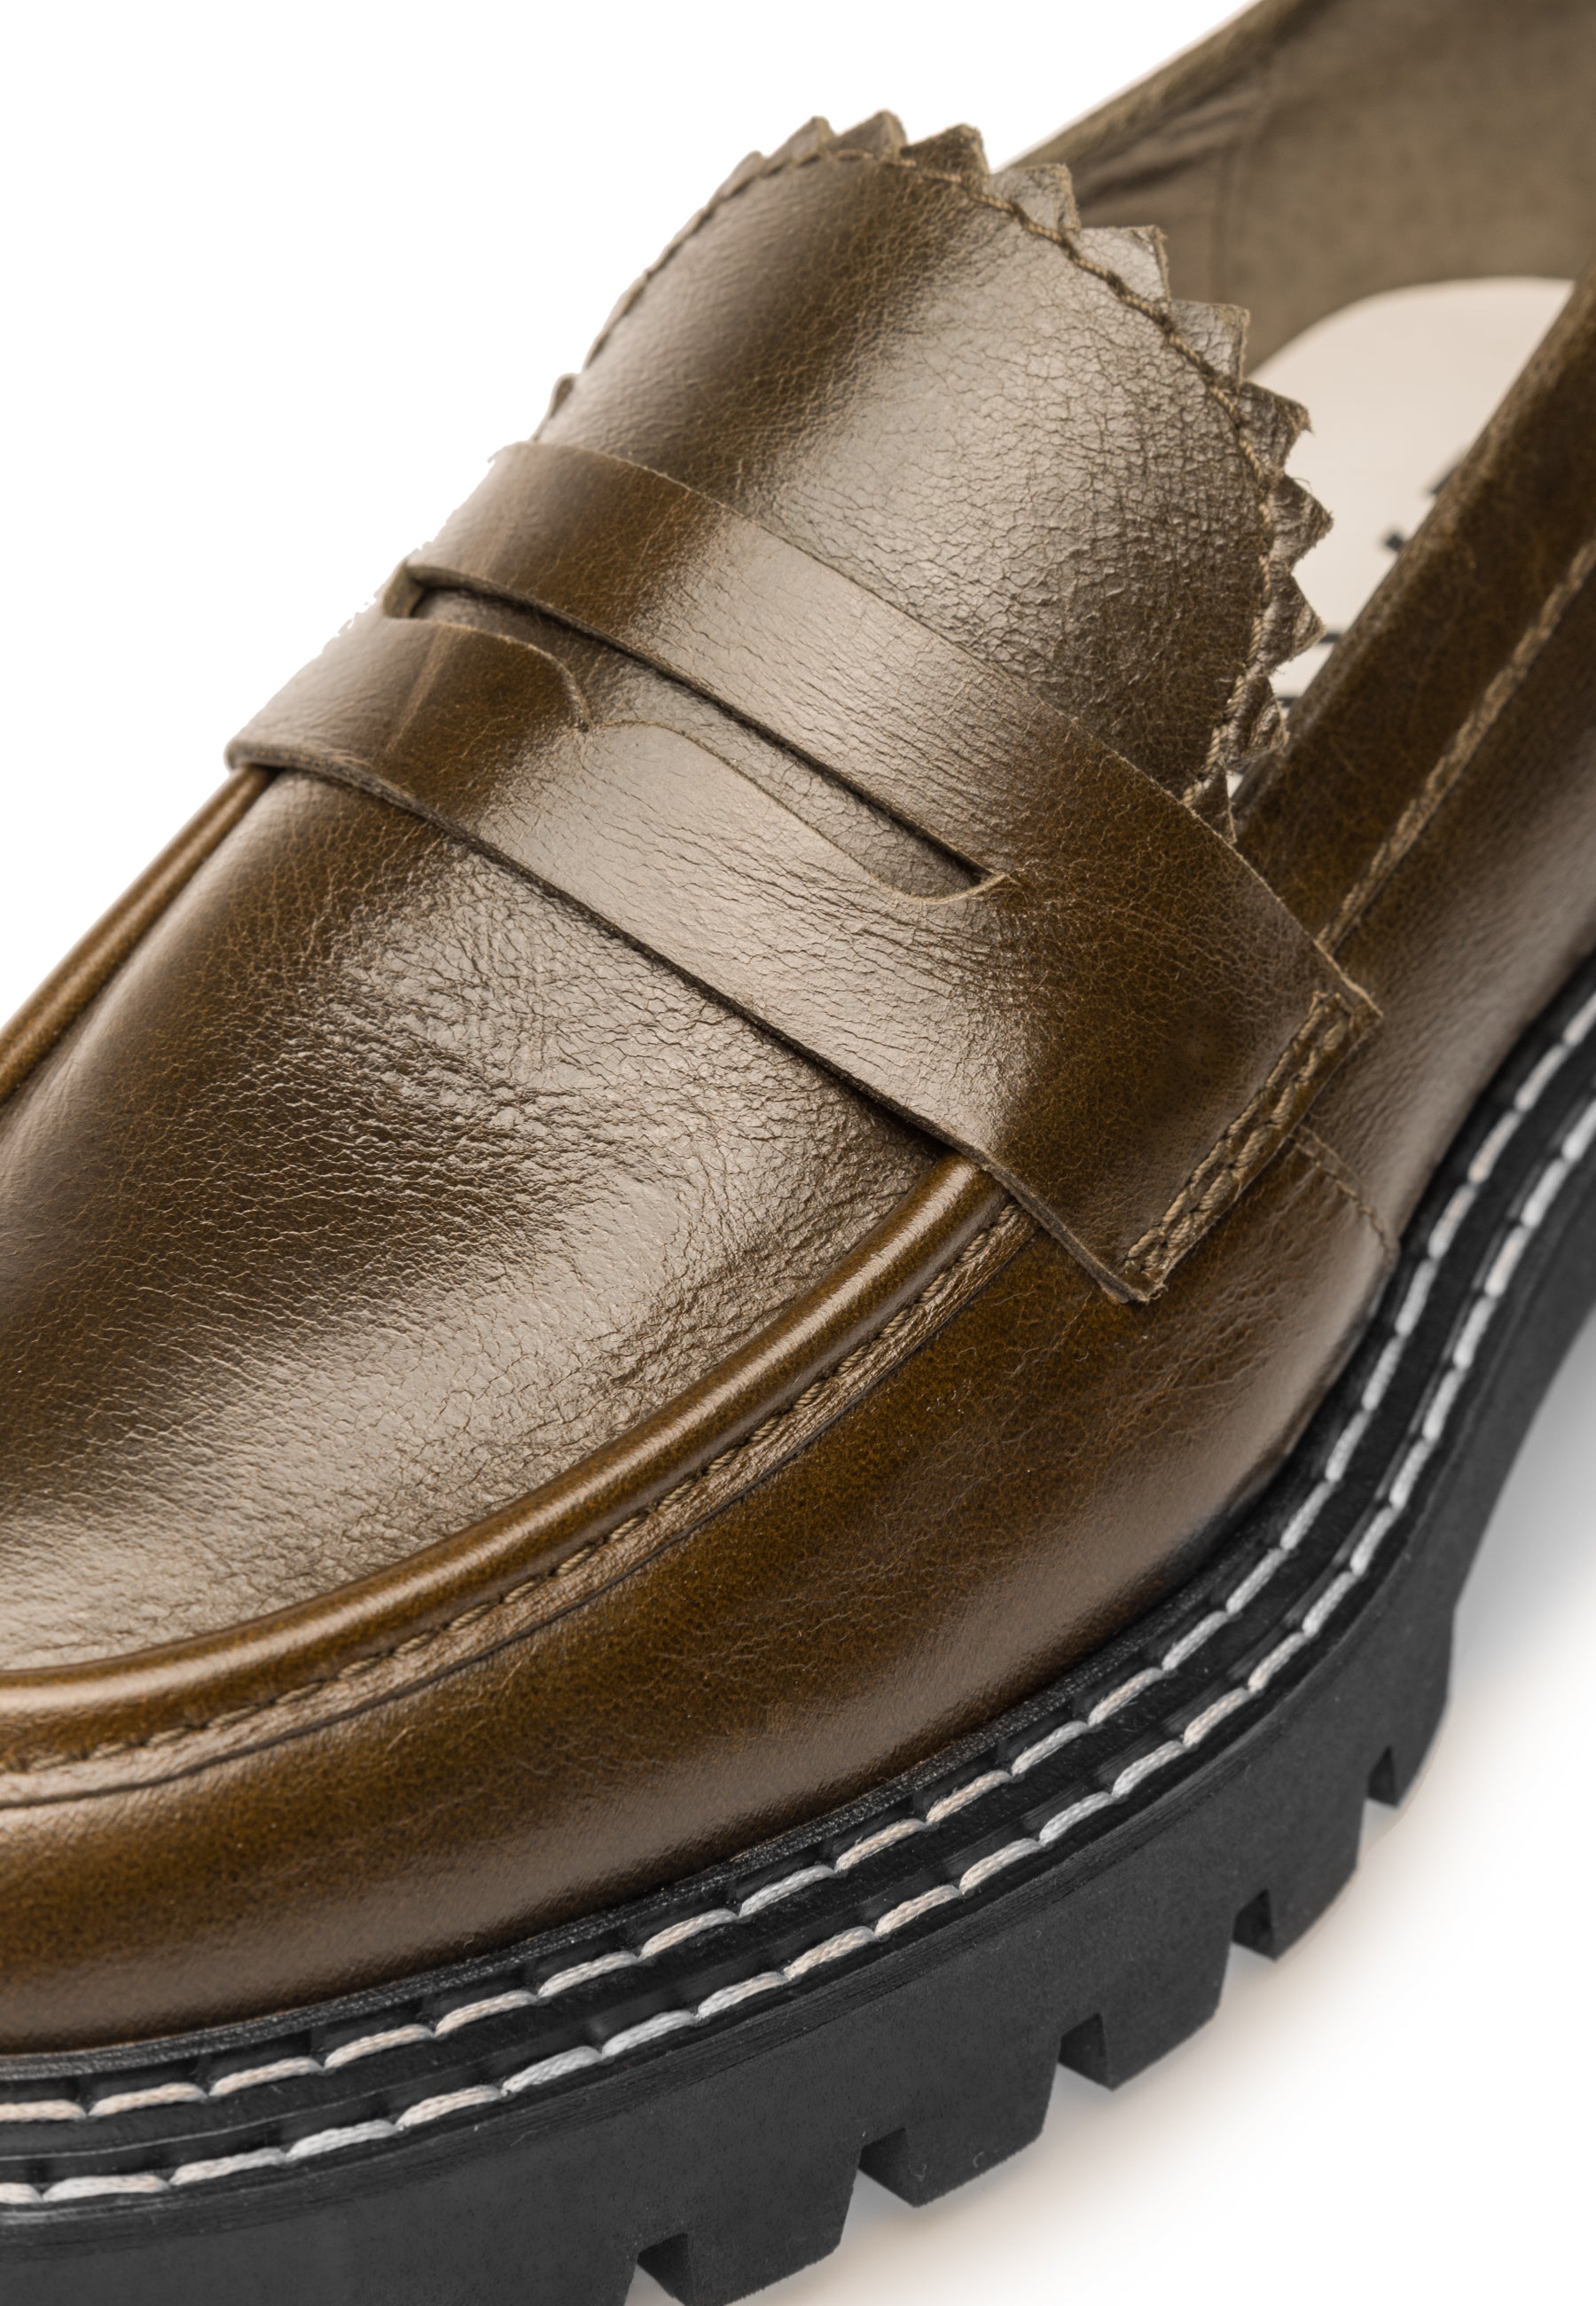 Matter Olive Leather Loafers LAST1682 - 5